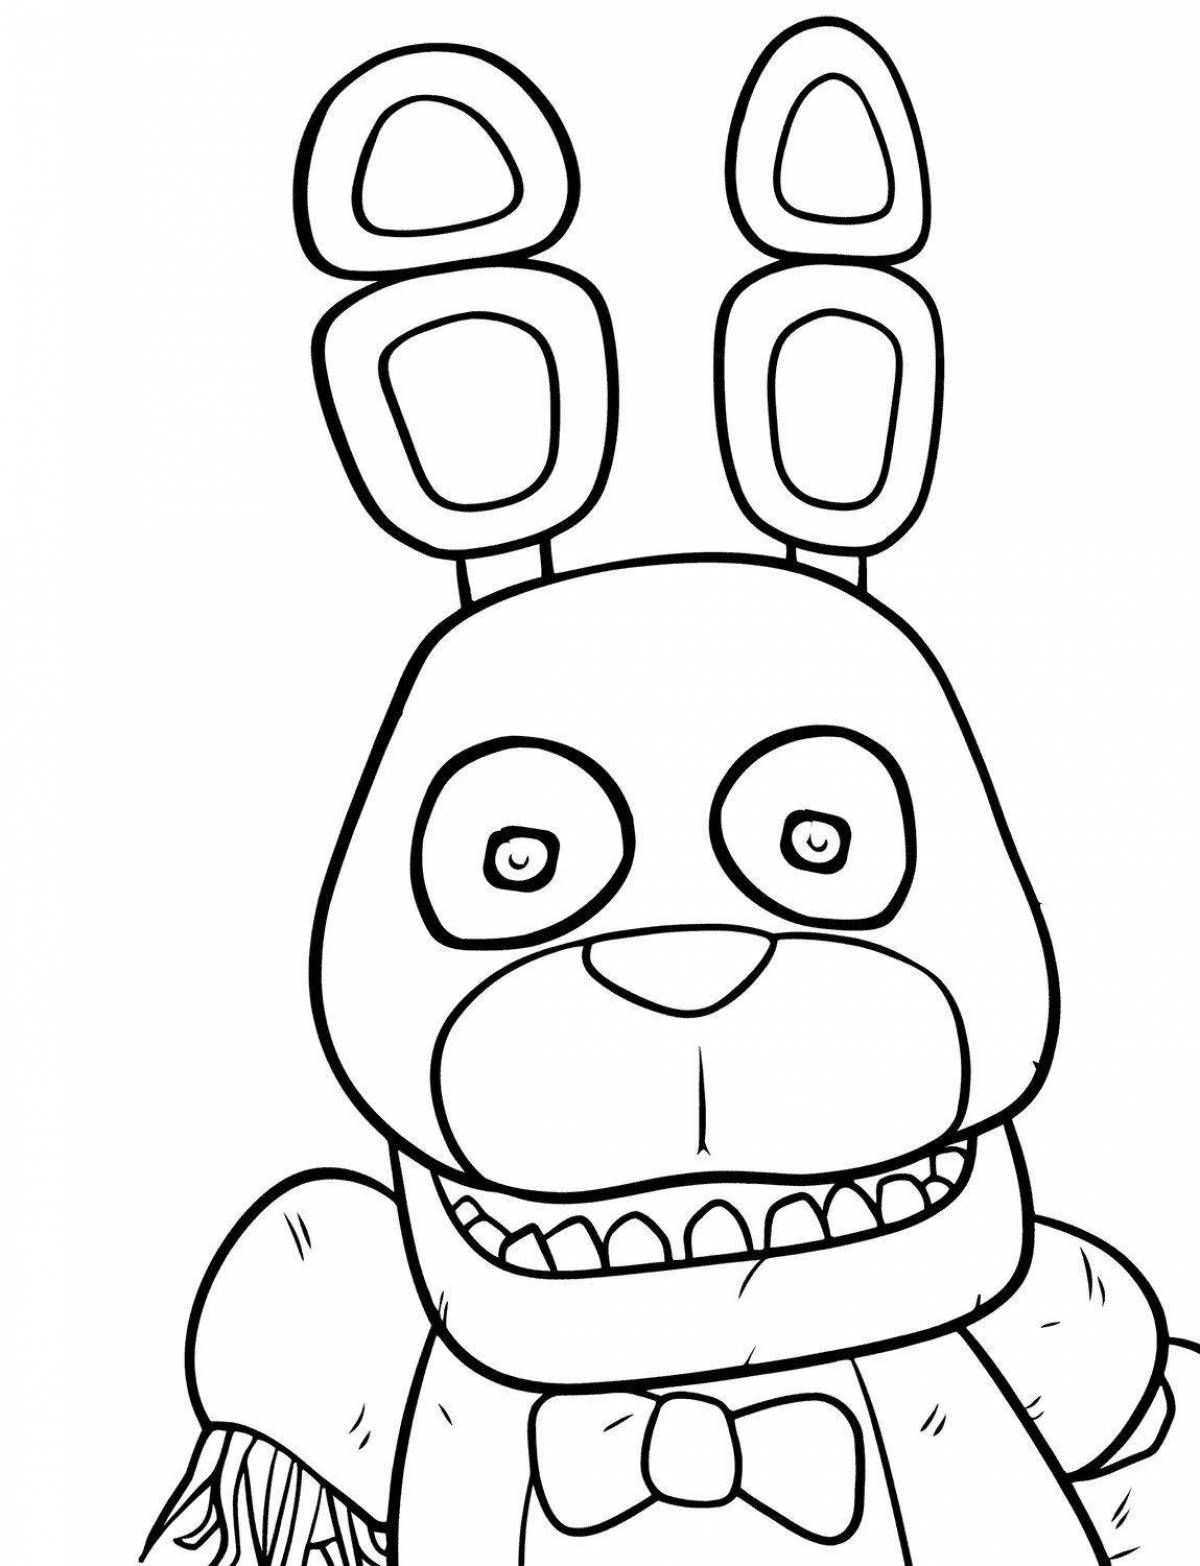 Magic bonnie from freddy's coloring book